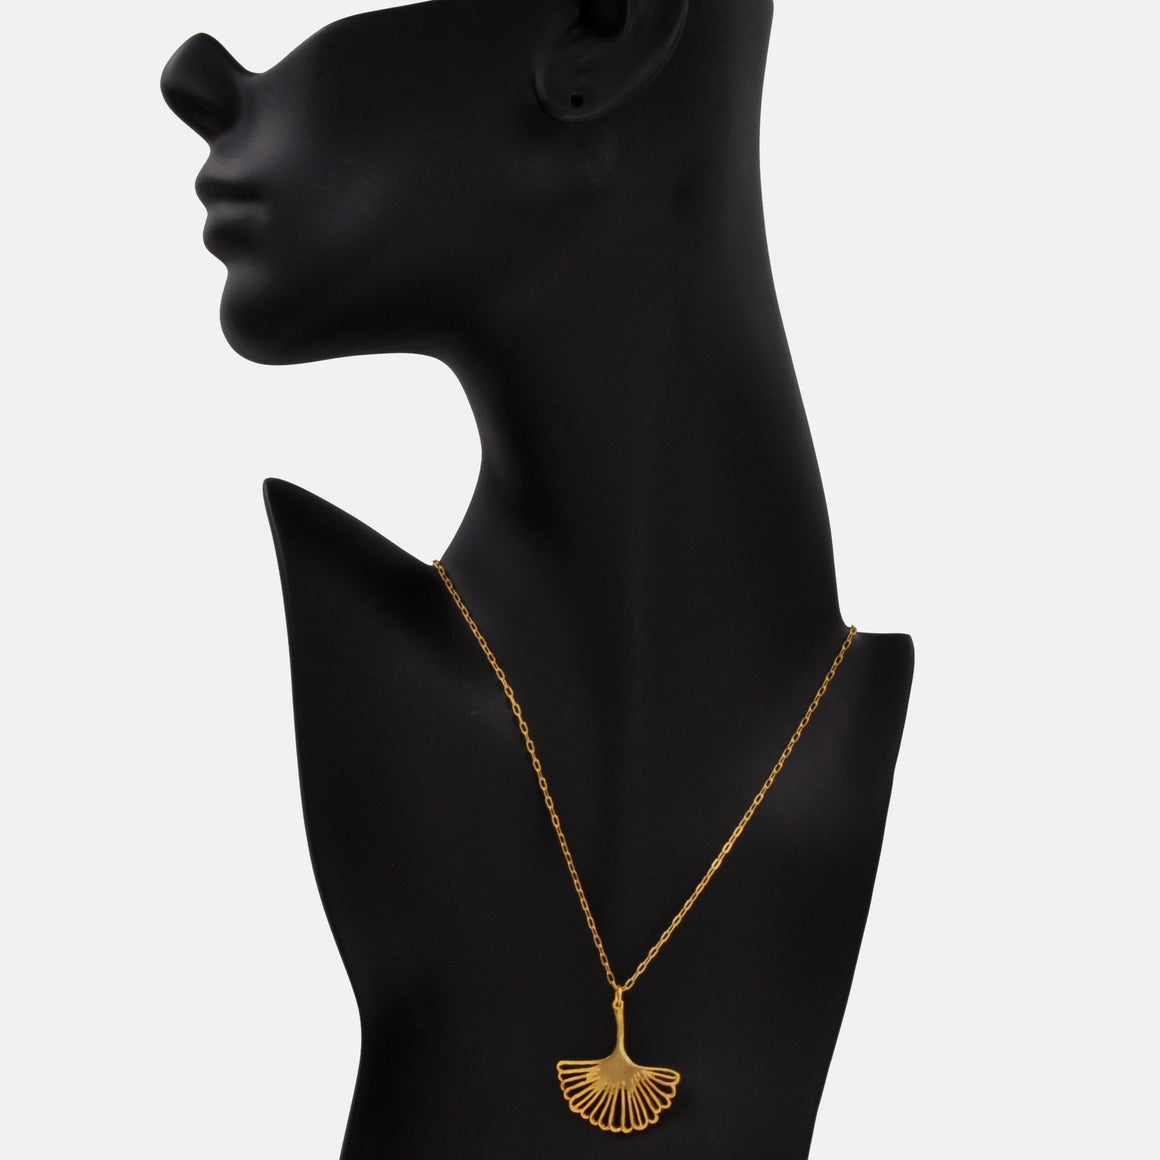 Ginkgo Pendant - 24K Gold Plated